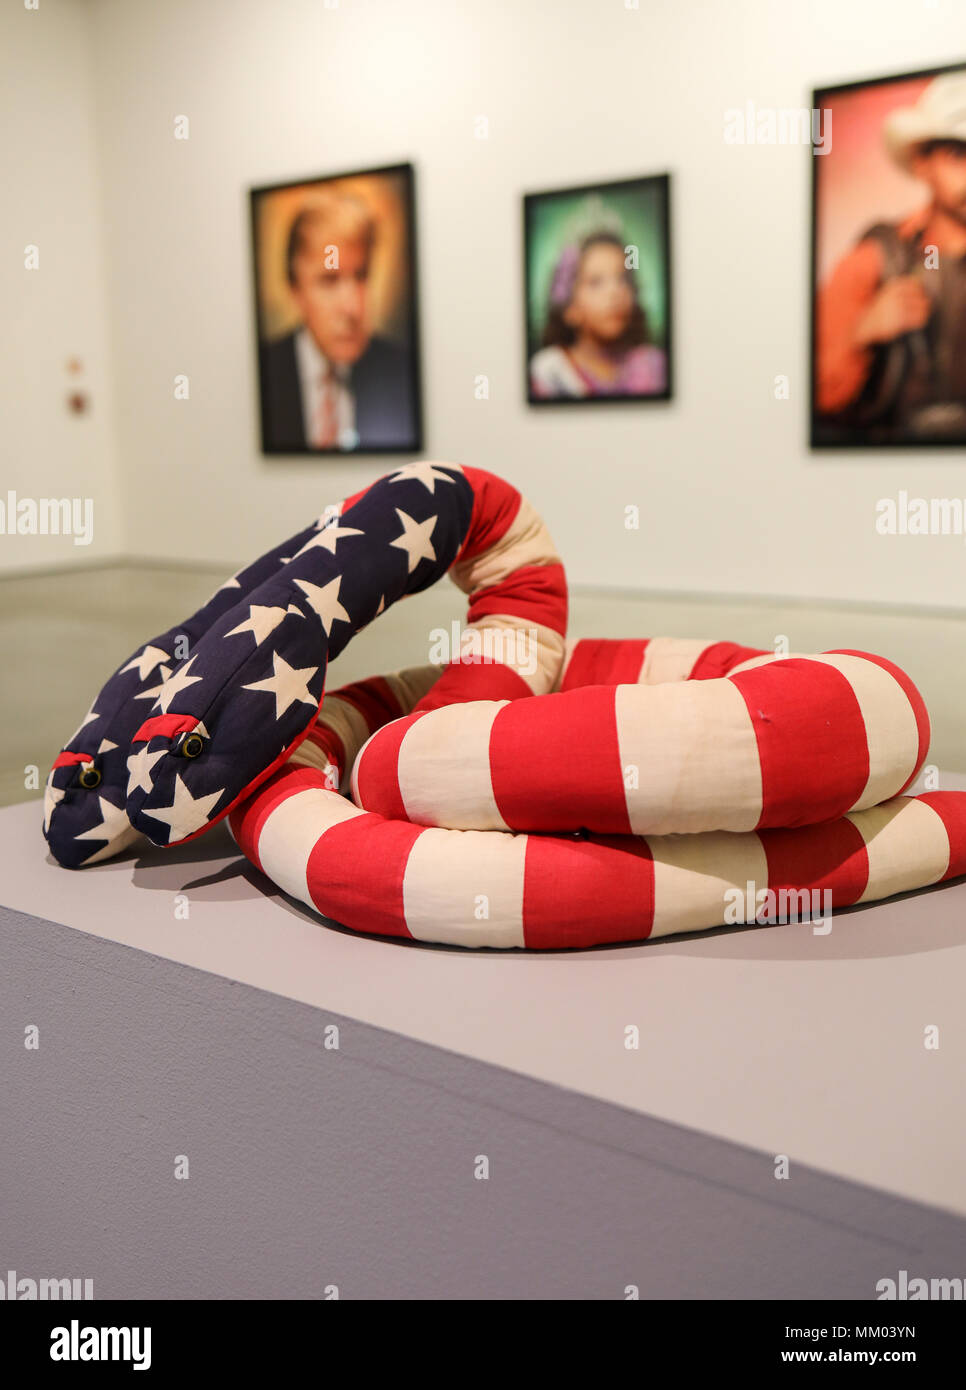 Cracow, Poland - May 8, 2018: Exibition Motherland in Art at Mocak in Krakow. Melissa Vanderberg - Polycephalic Patriot. Two-headed plush snake, made from pieces of flags is a criticism of a two party politicial system Credit: Wieslaw Jarek/Alamy Live News Stock Photo